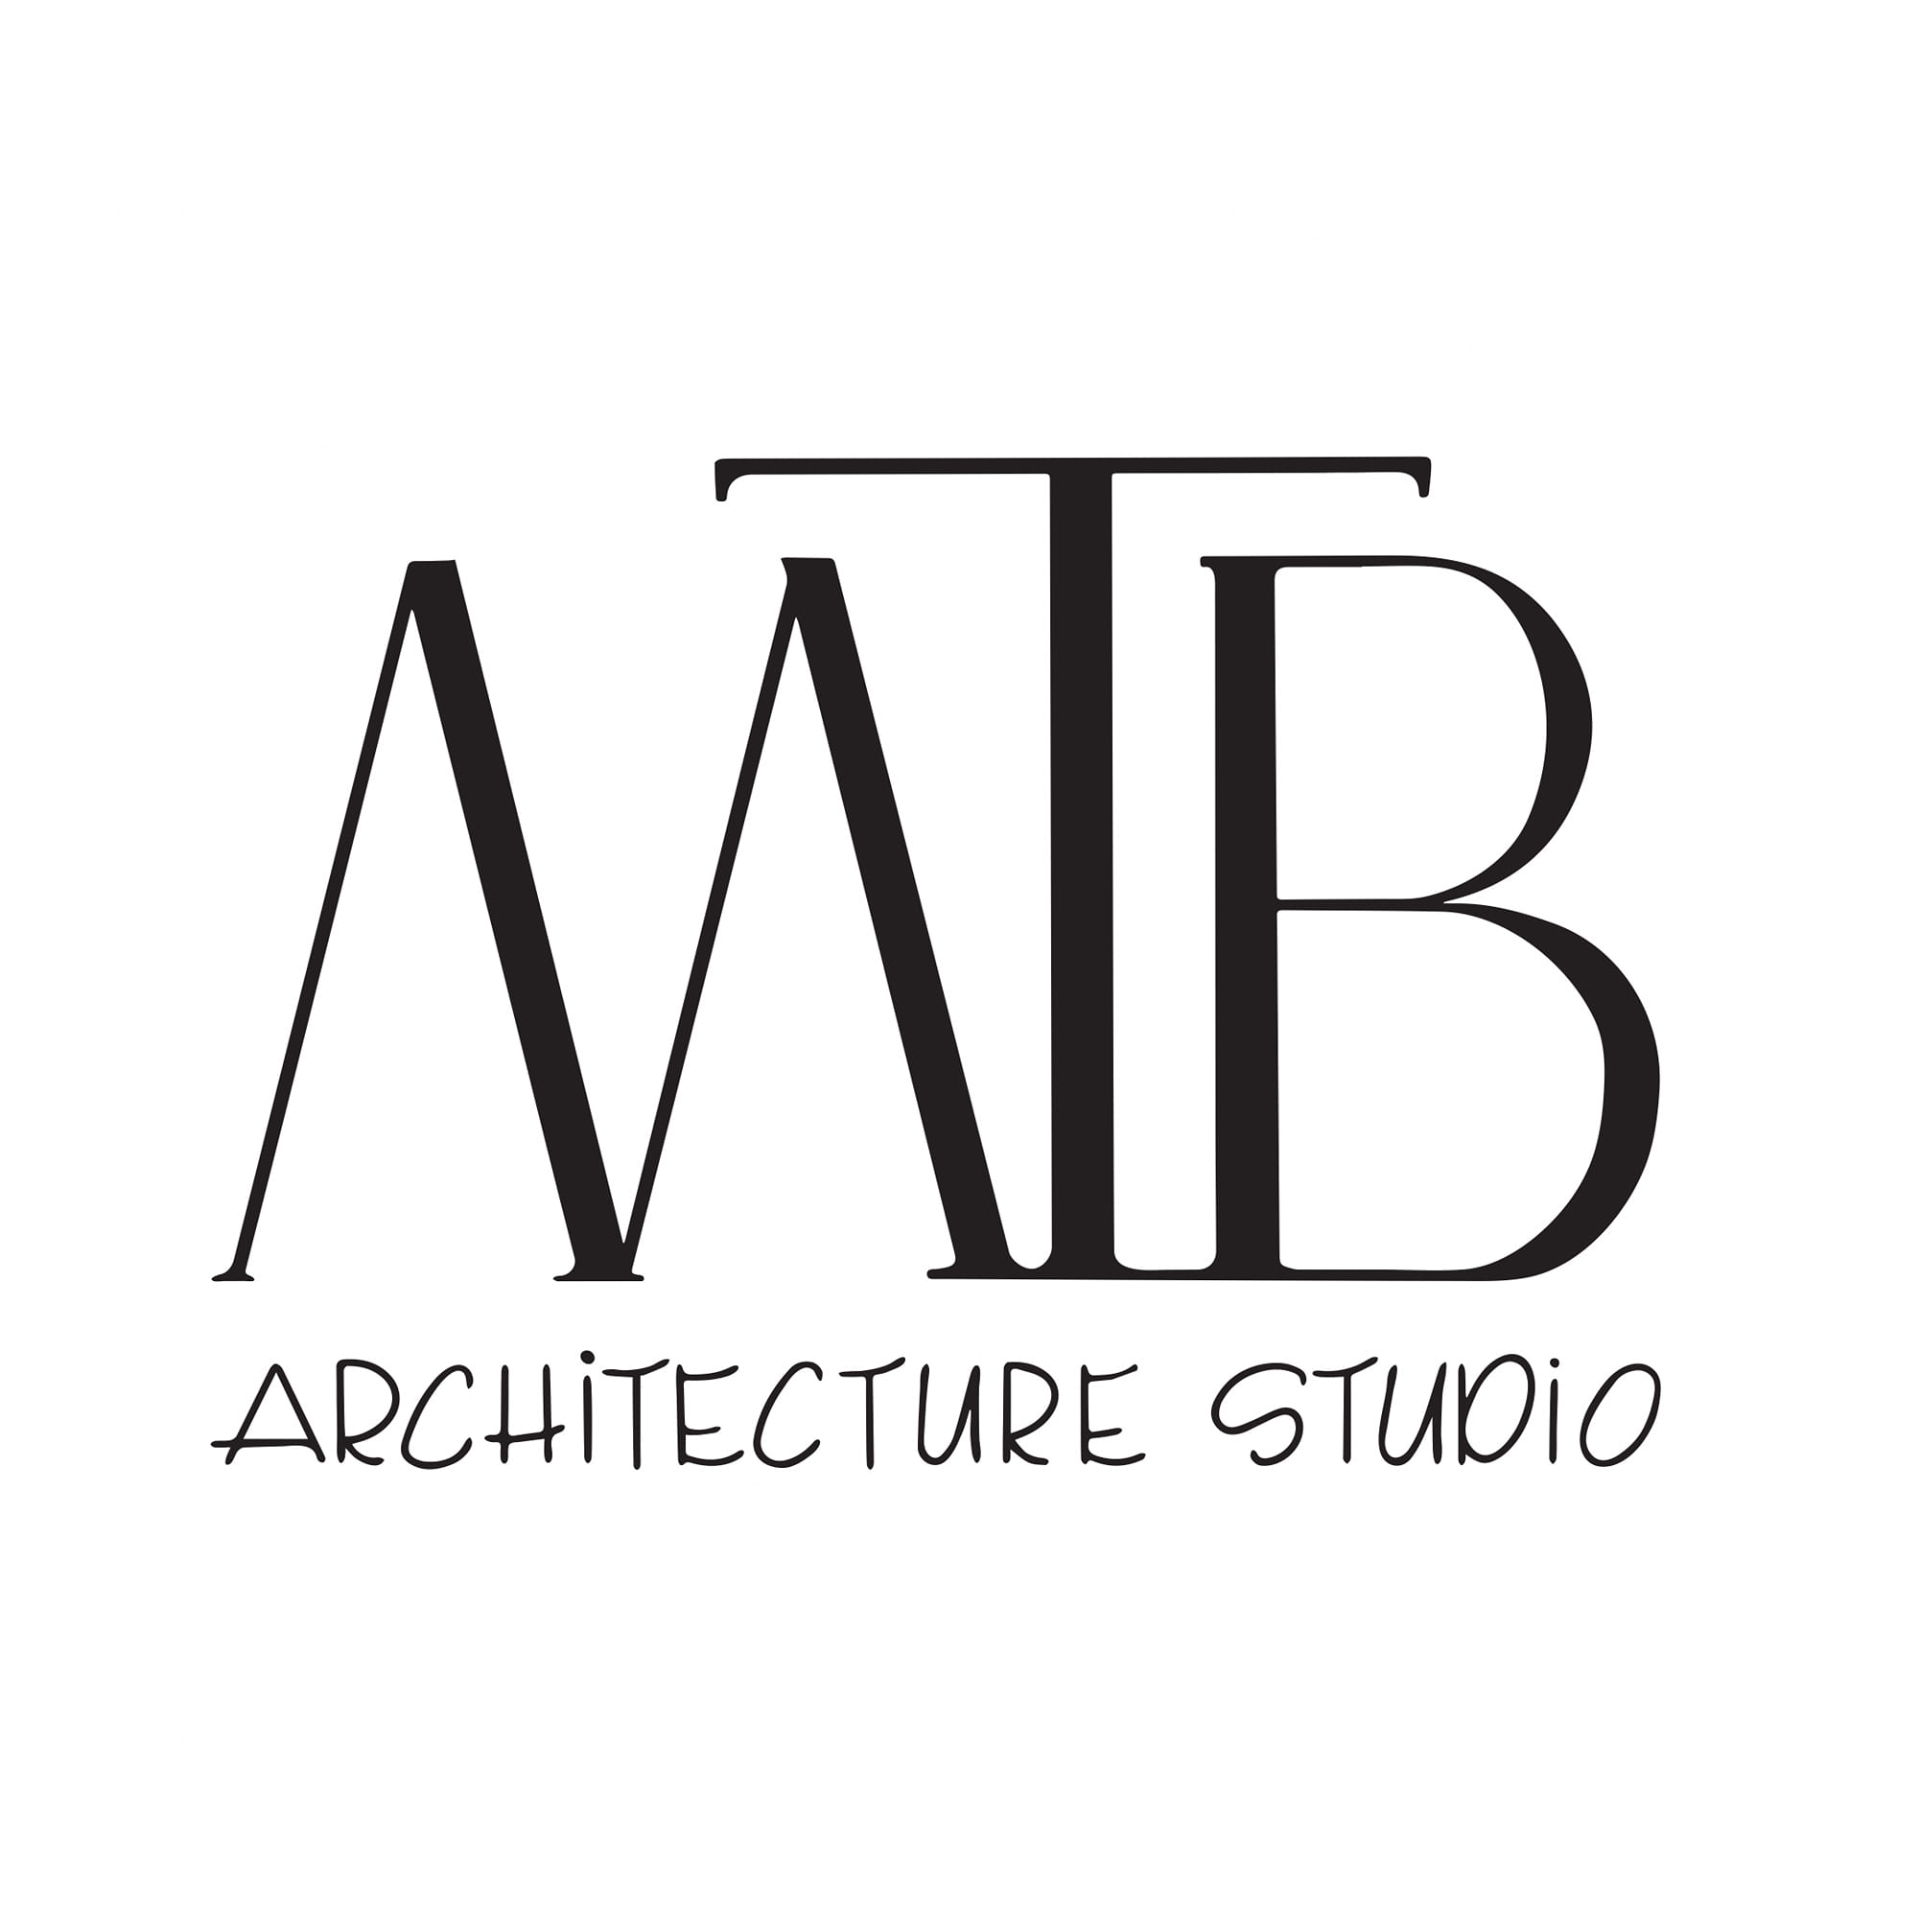 More Than Buildings Architecture and Design Studio|Architect|Professional Services